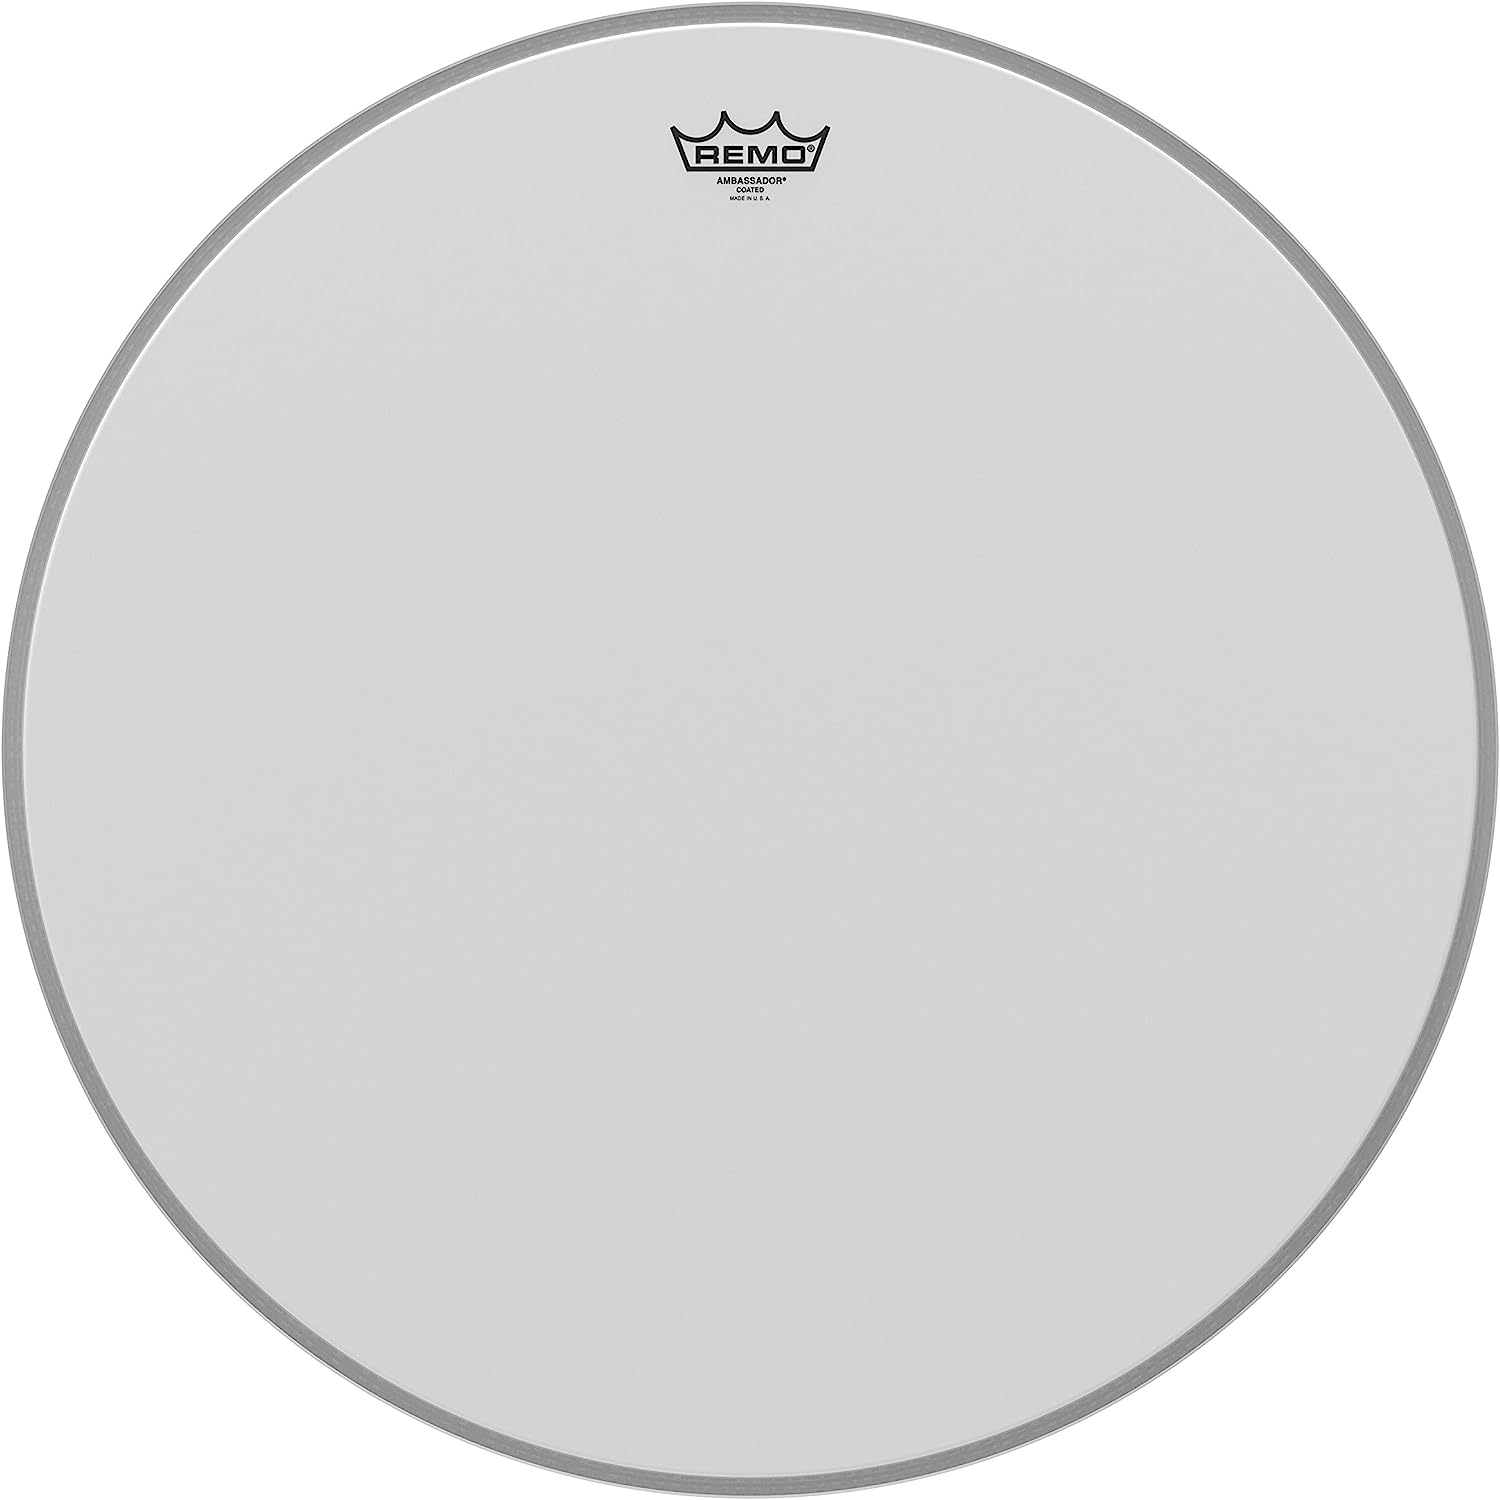 Remo BR-1124-00, Bass, Ambassador, Coated Drum Head, 24 inch